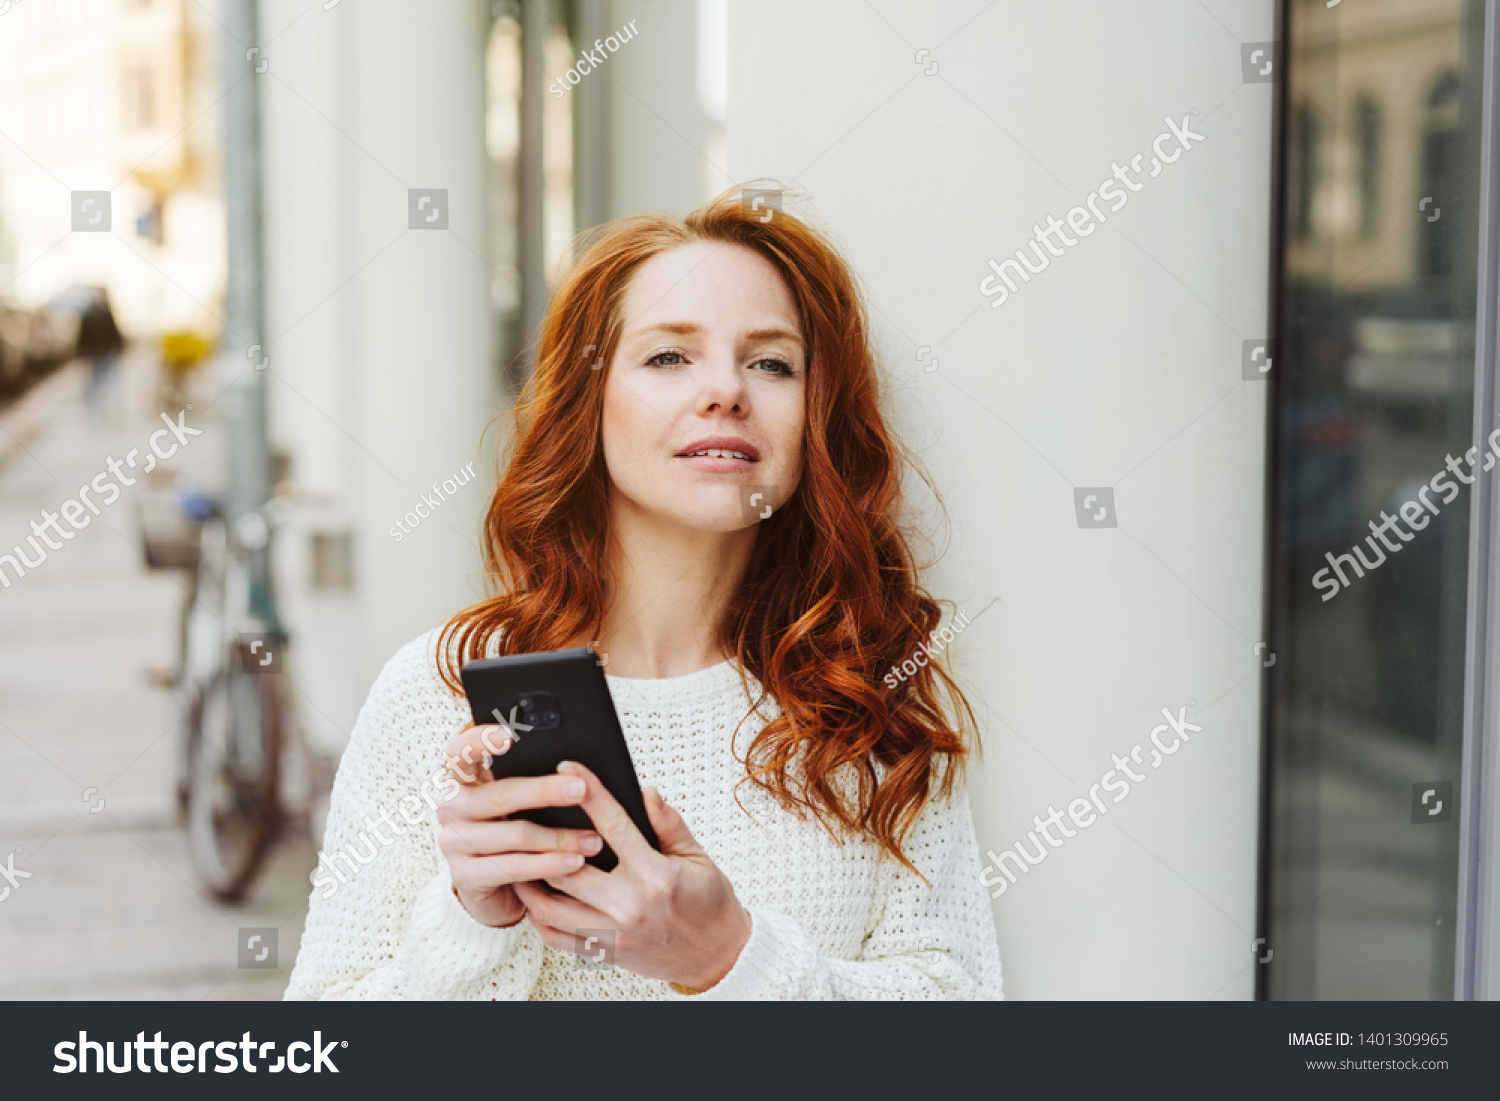 Young woman waiting in town for a meeting holding her mobile phone and peering expectantly down the street #1401309965